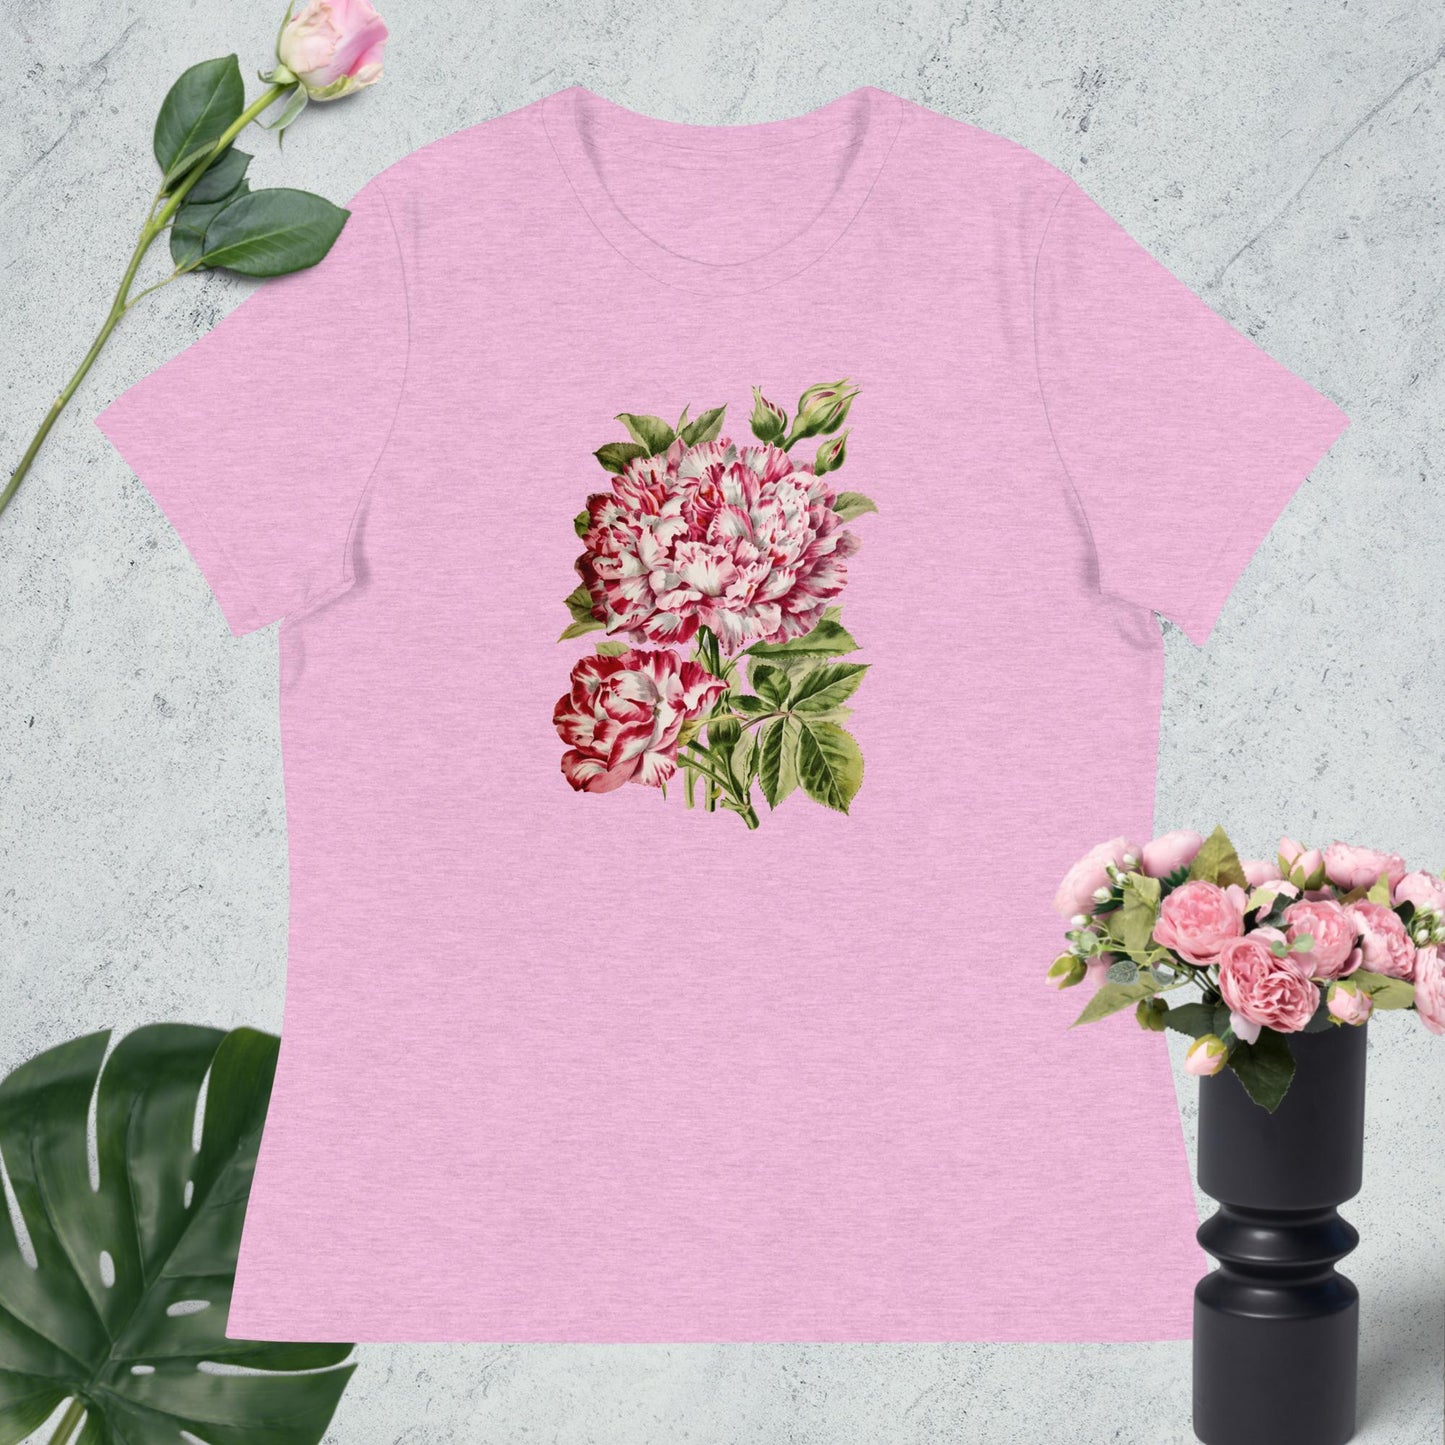 Women's Relaxed T-Shirt pink and white flower